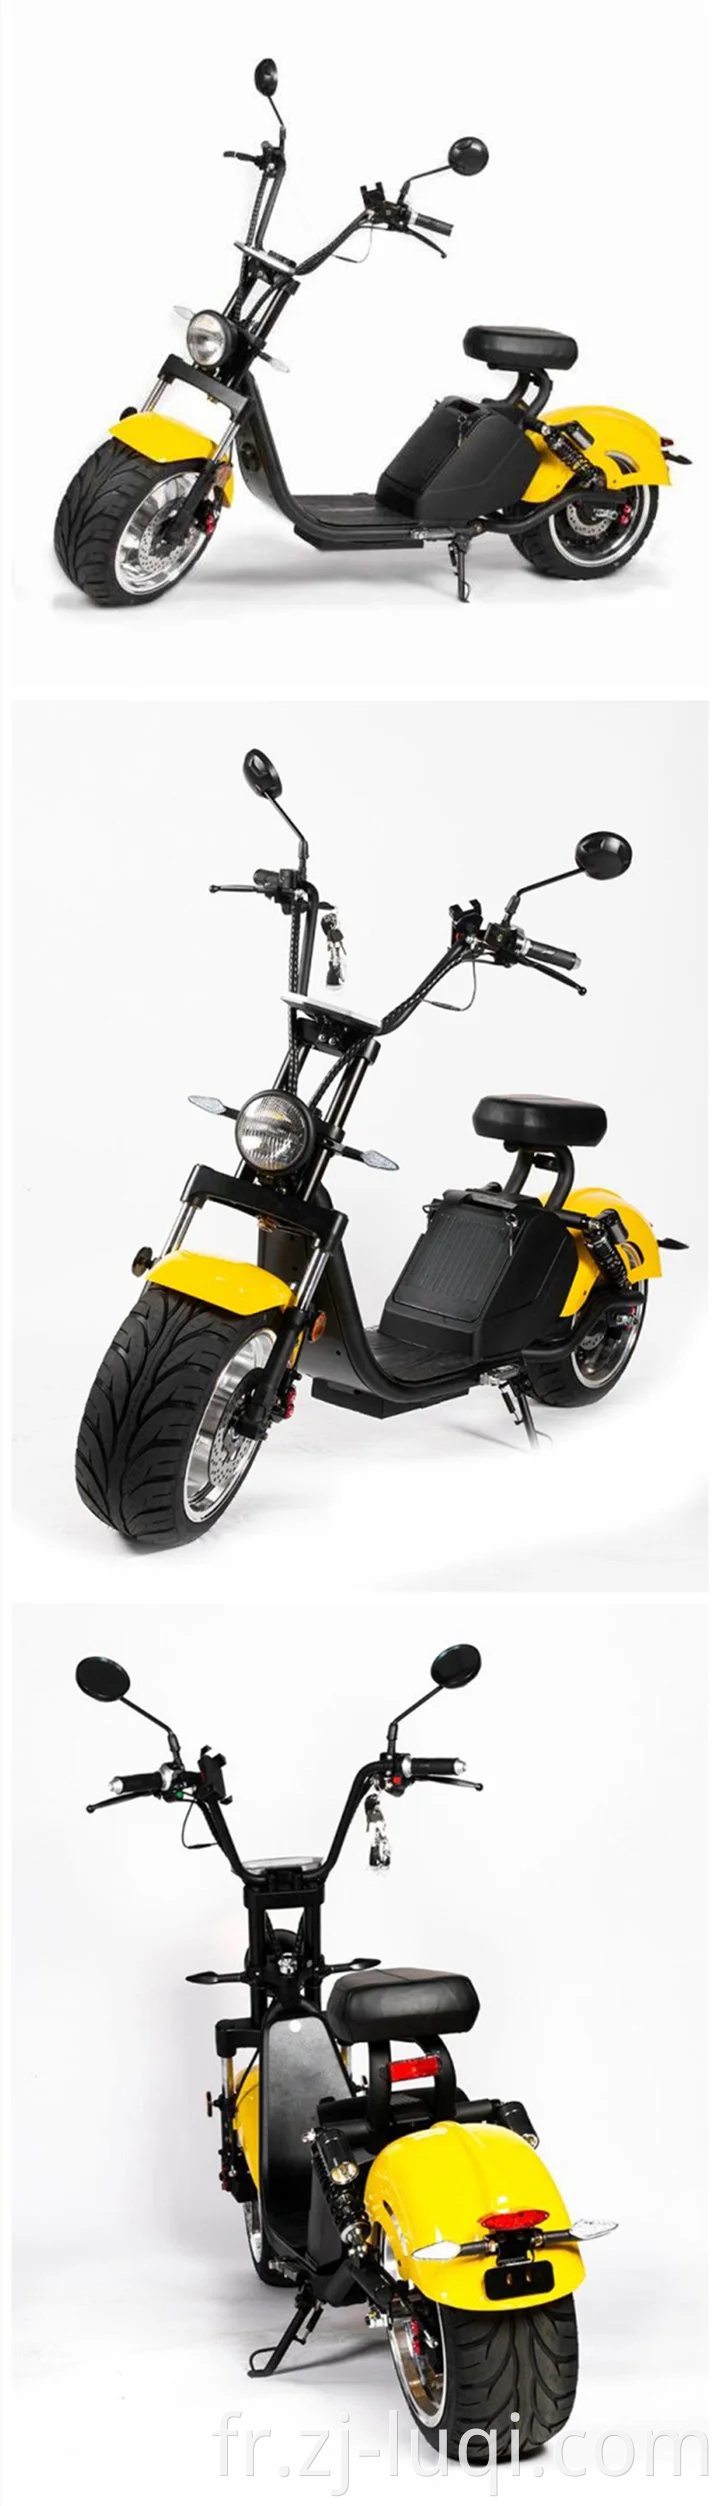 Vente en gros Best Buy 2020 Nouvelle moto CEE CEE TIRE 1500W / 3000W CITYCOCO ADULLYCOPER Scooter Electric